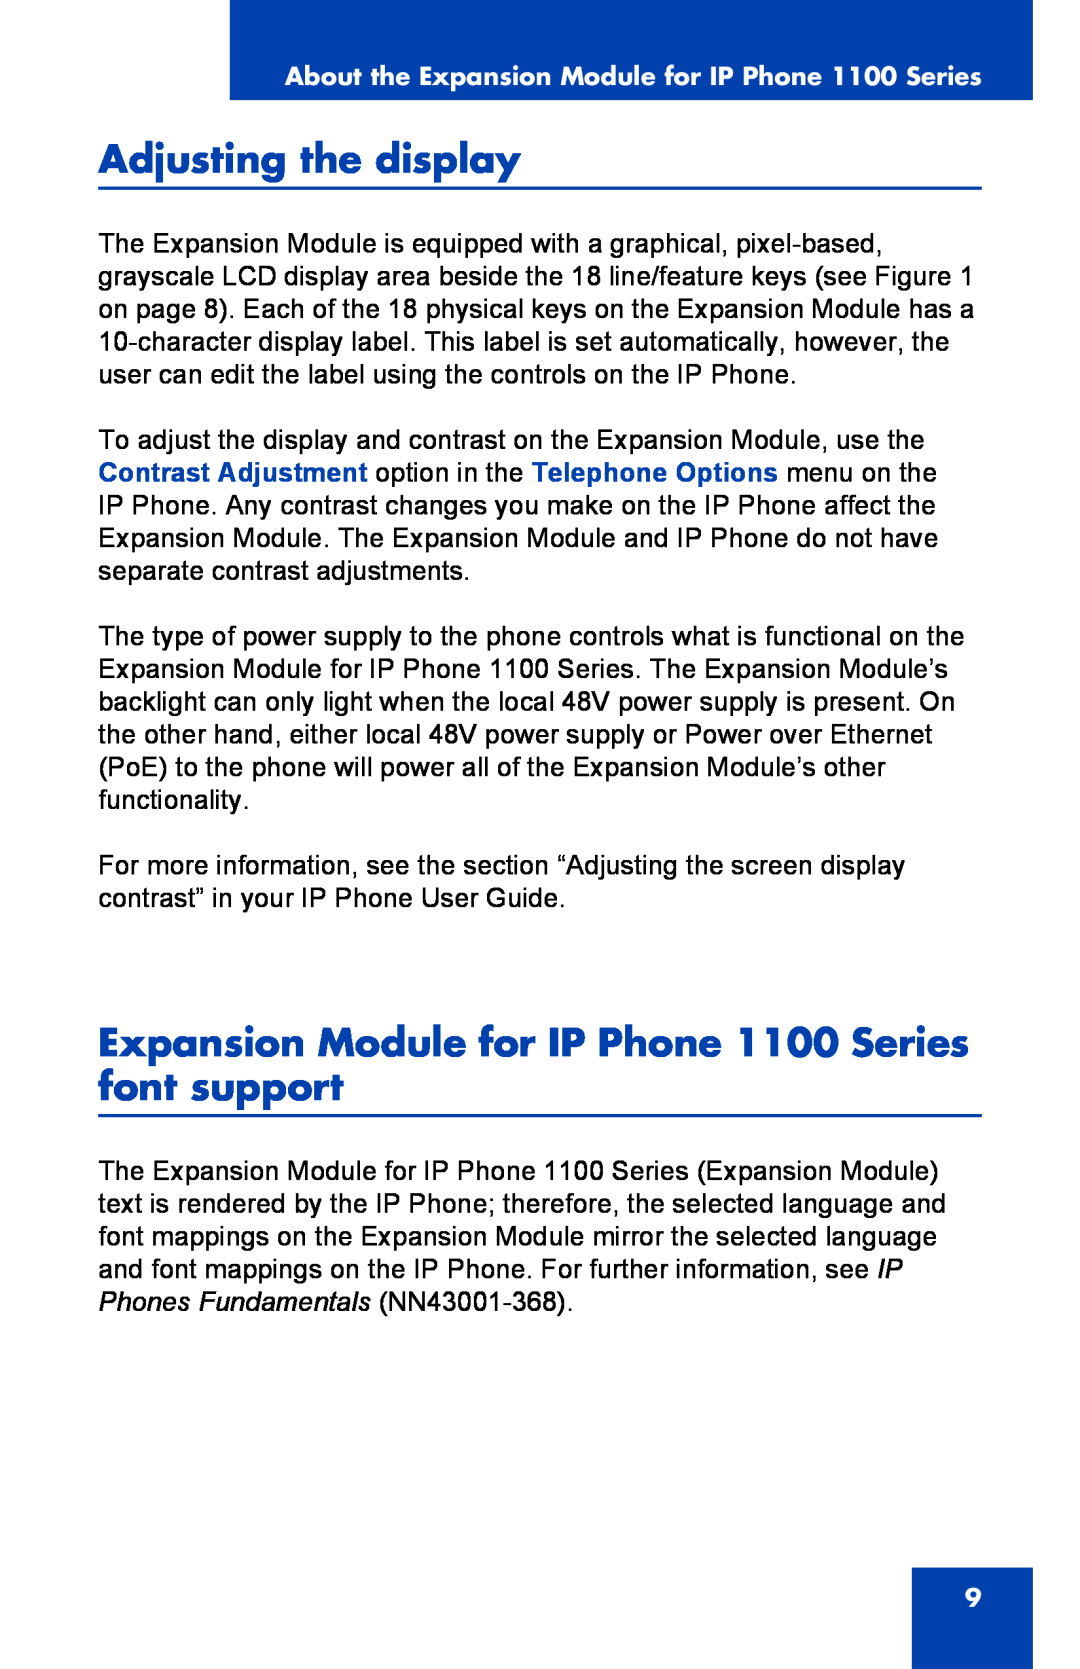 Nortel Networks manual Adjusting the display, Expansion Module for IP Phone 1100 Series font support 